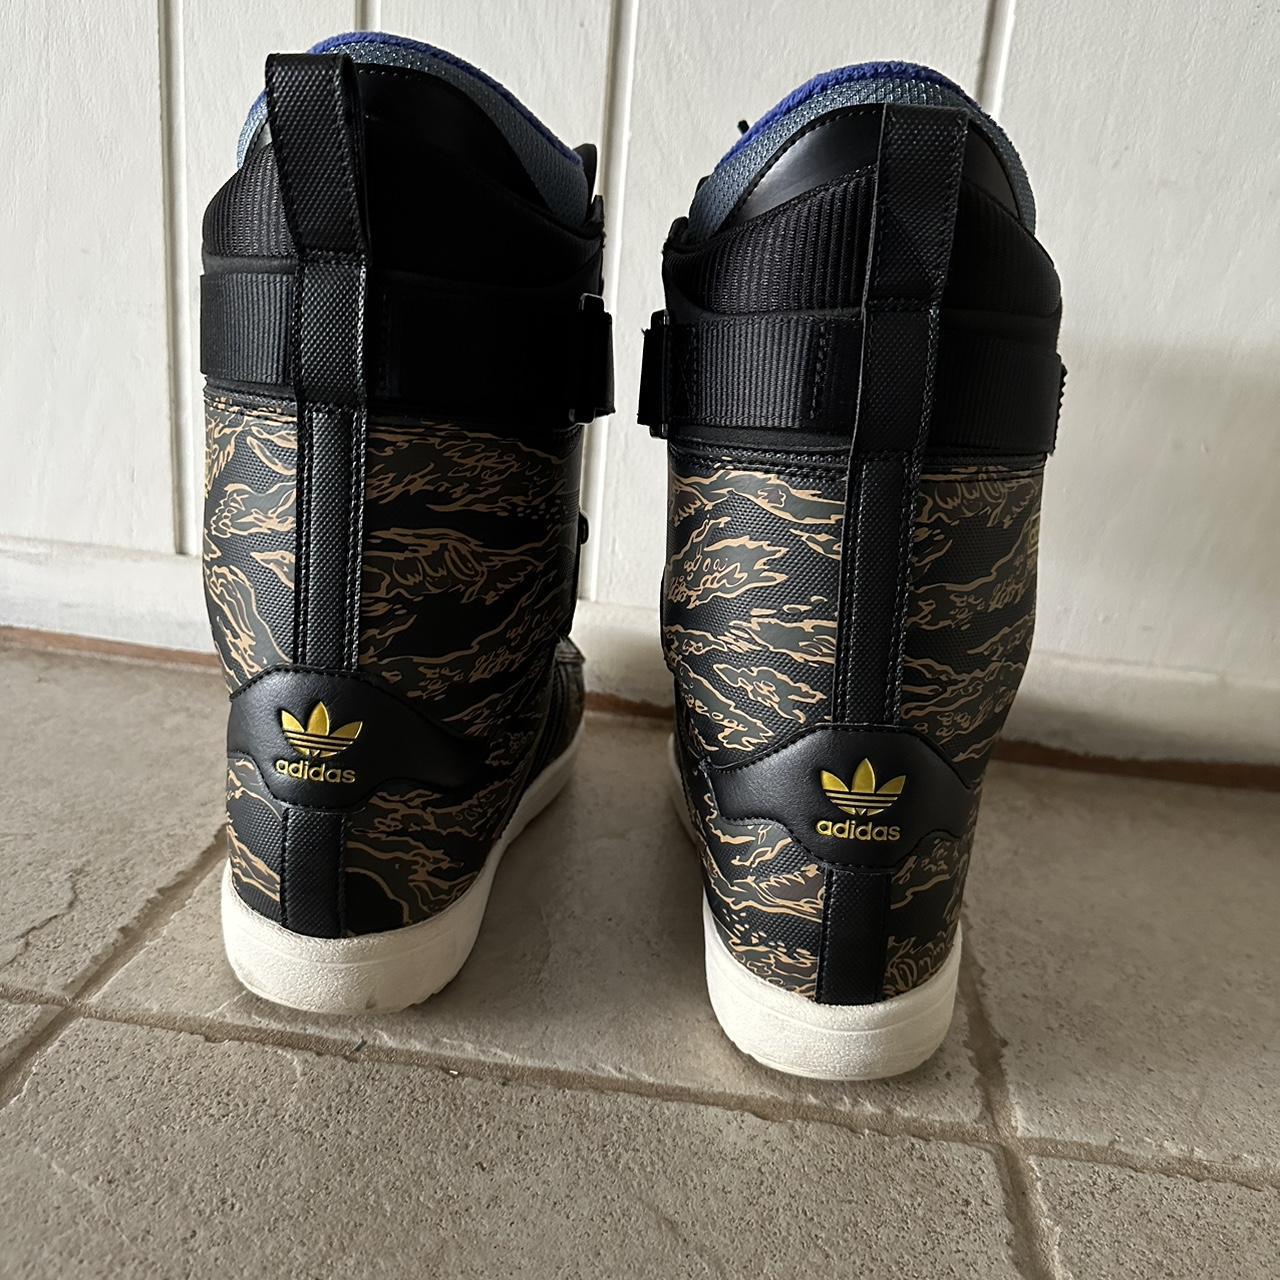 Adidas Men's Gold and Black Boots (3)